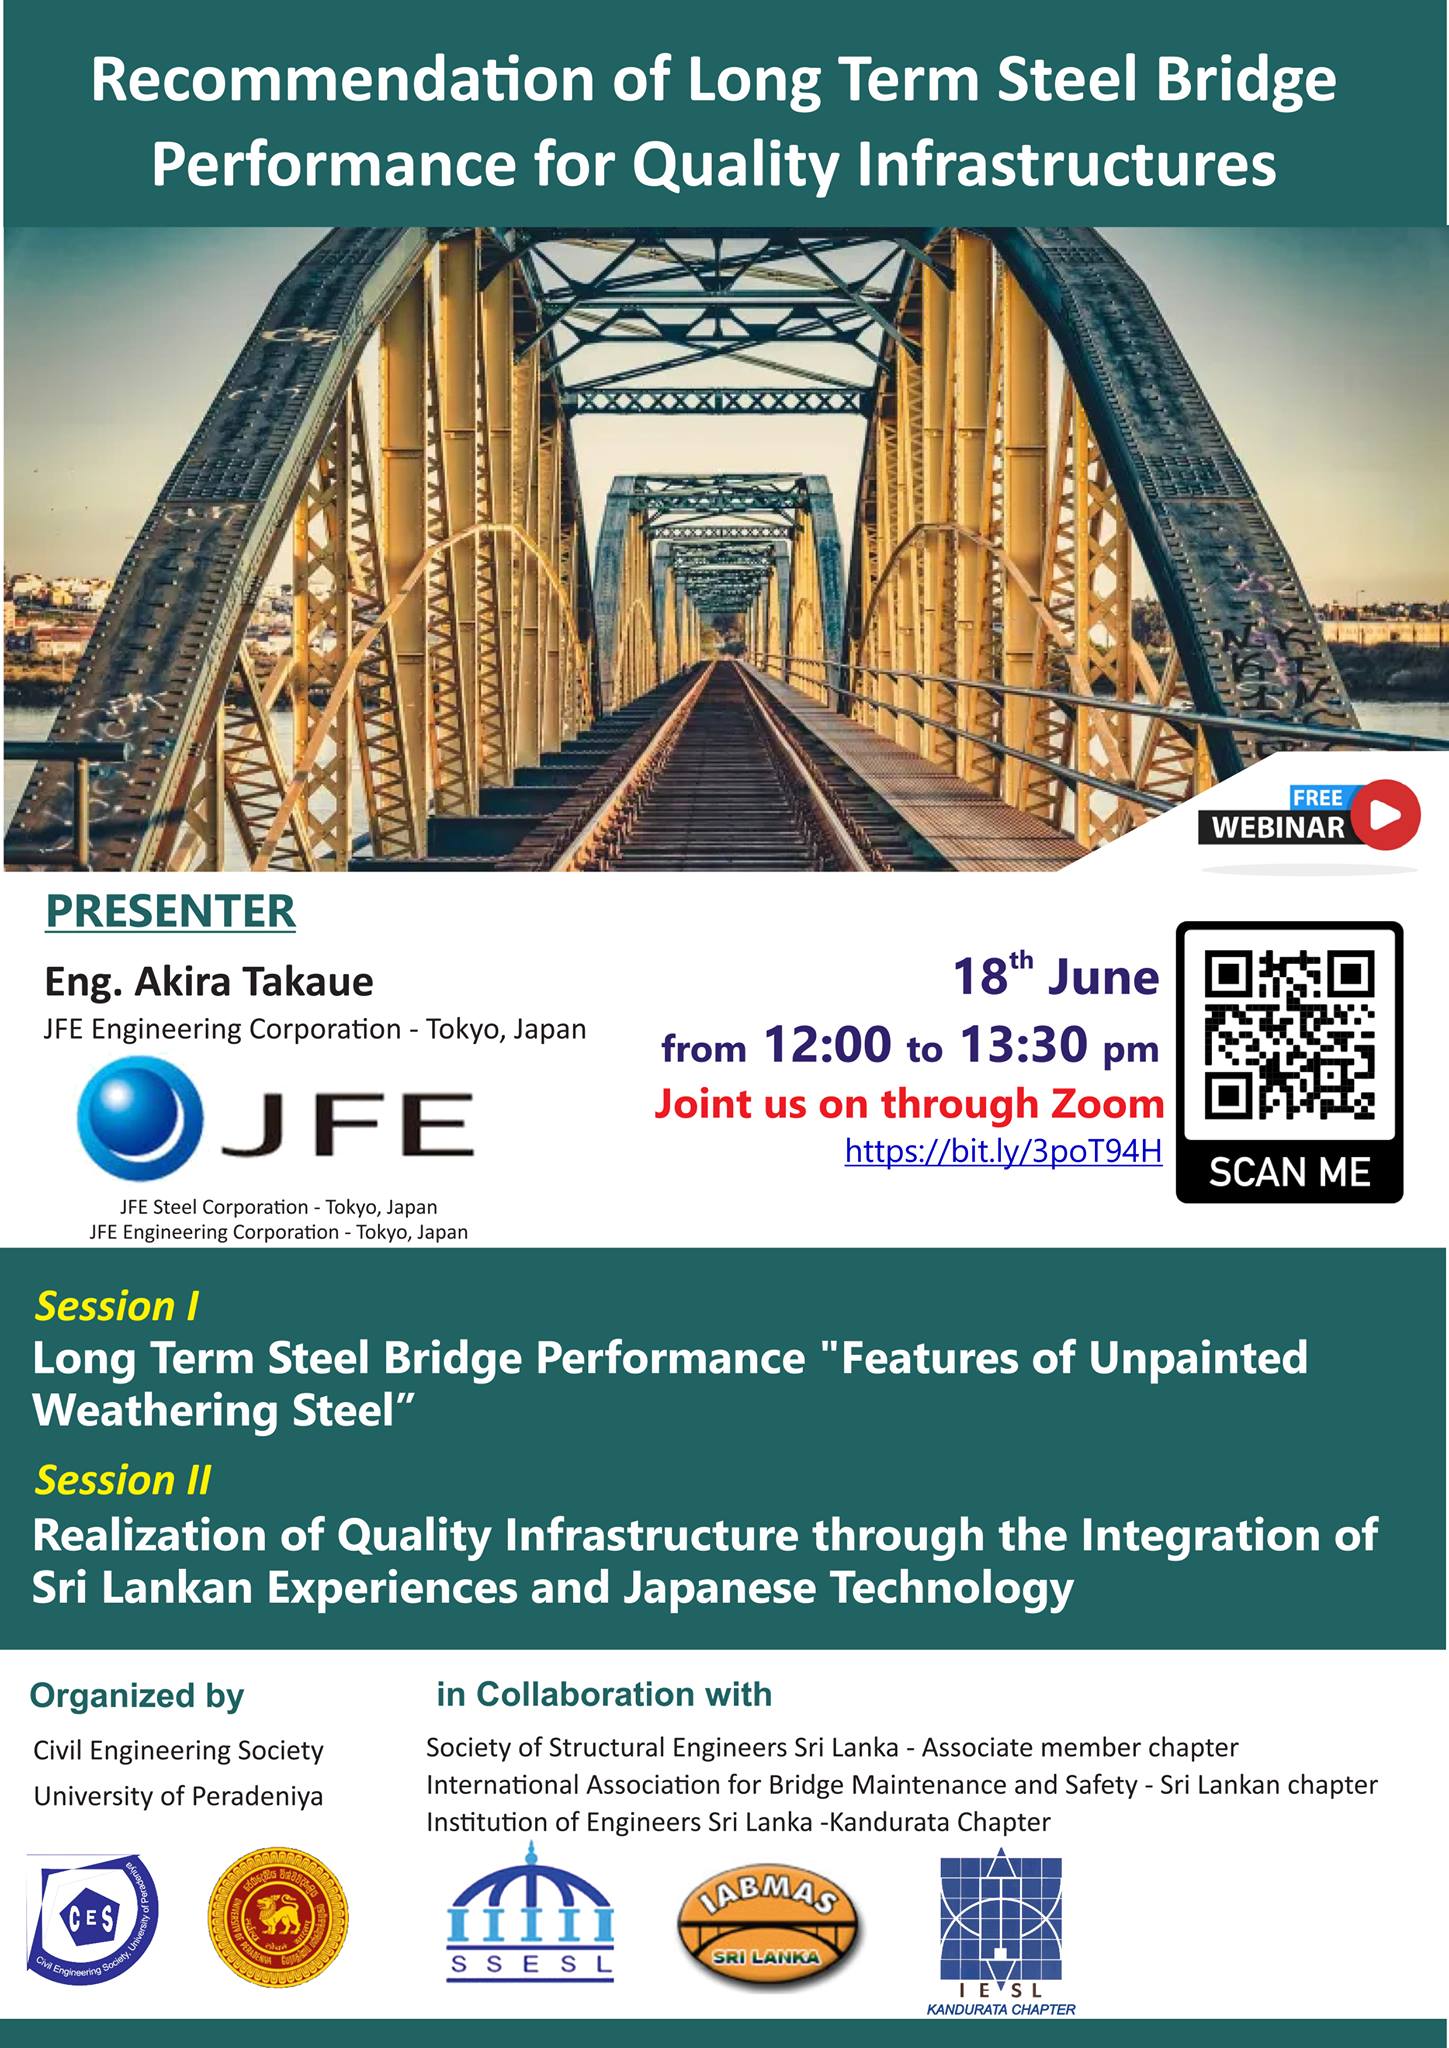 CES Talk on Recommendation of Long Term Steel Bridge Performance for
Quality Infrastructures